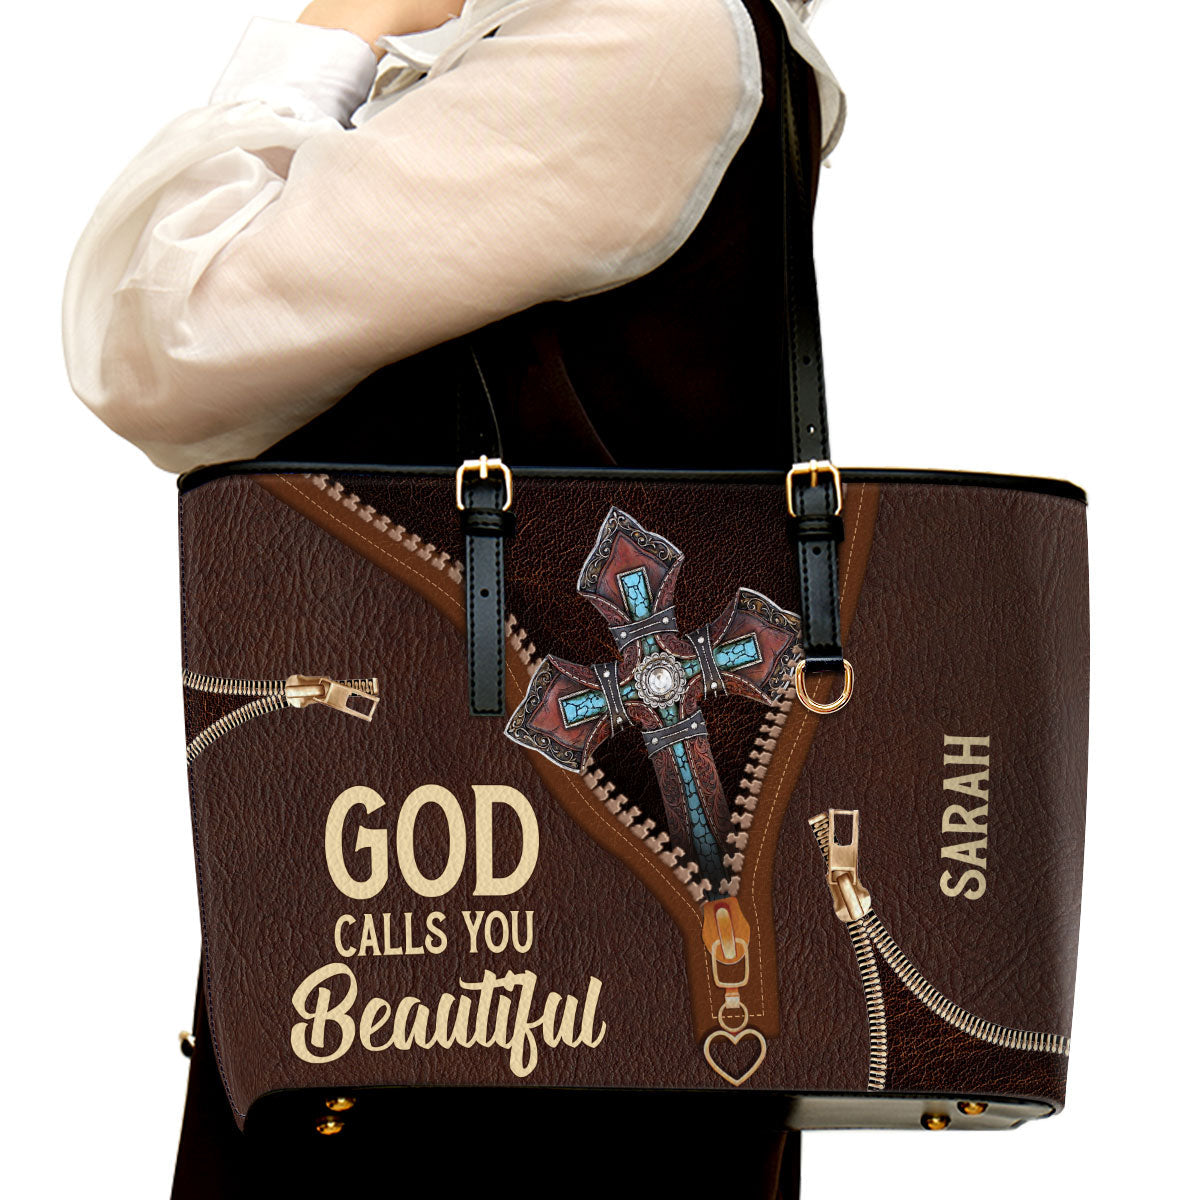 God Calls You Beautiful Lovely Personalized Large Leather Tote Bag - Christian Gifts For Women